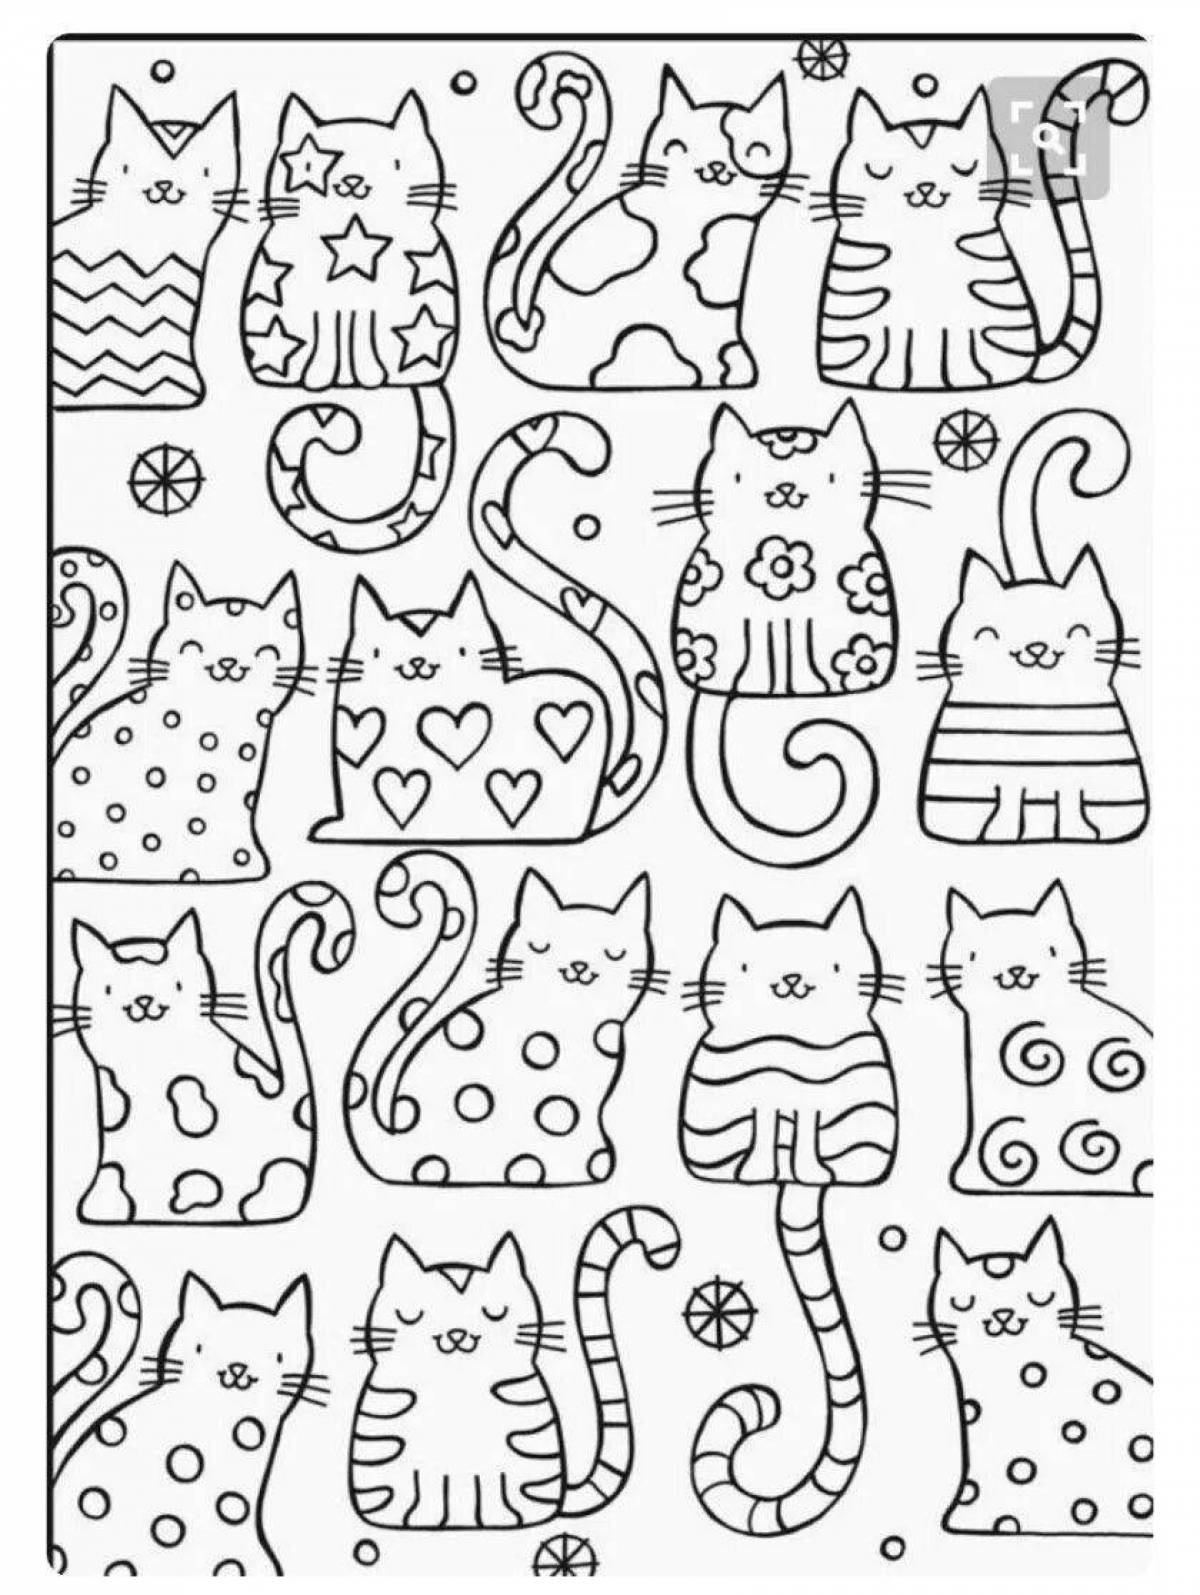 Fun little cats coloring book